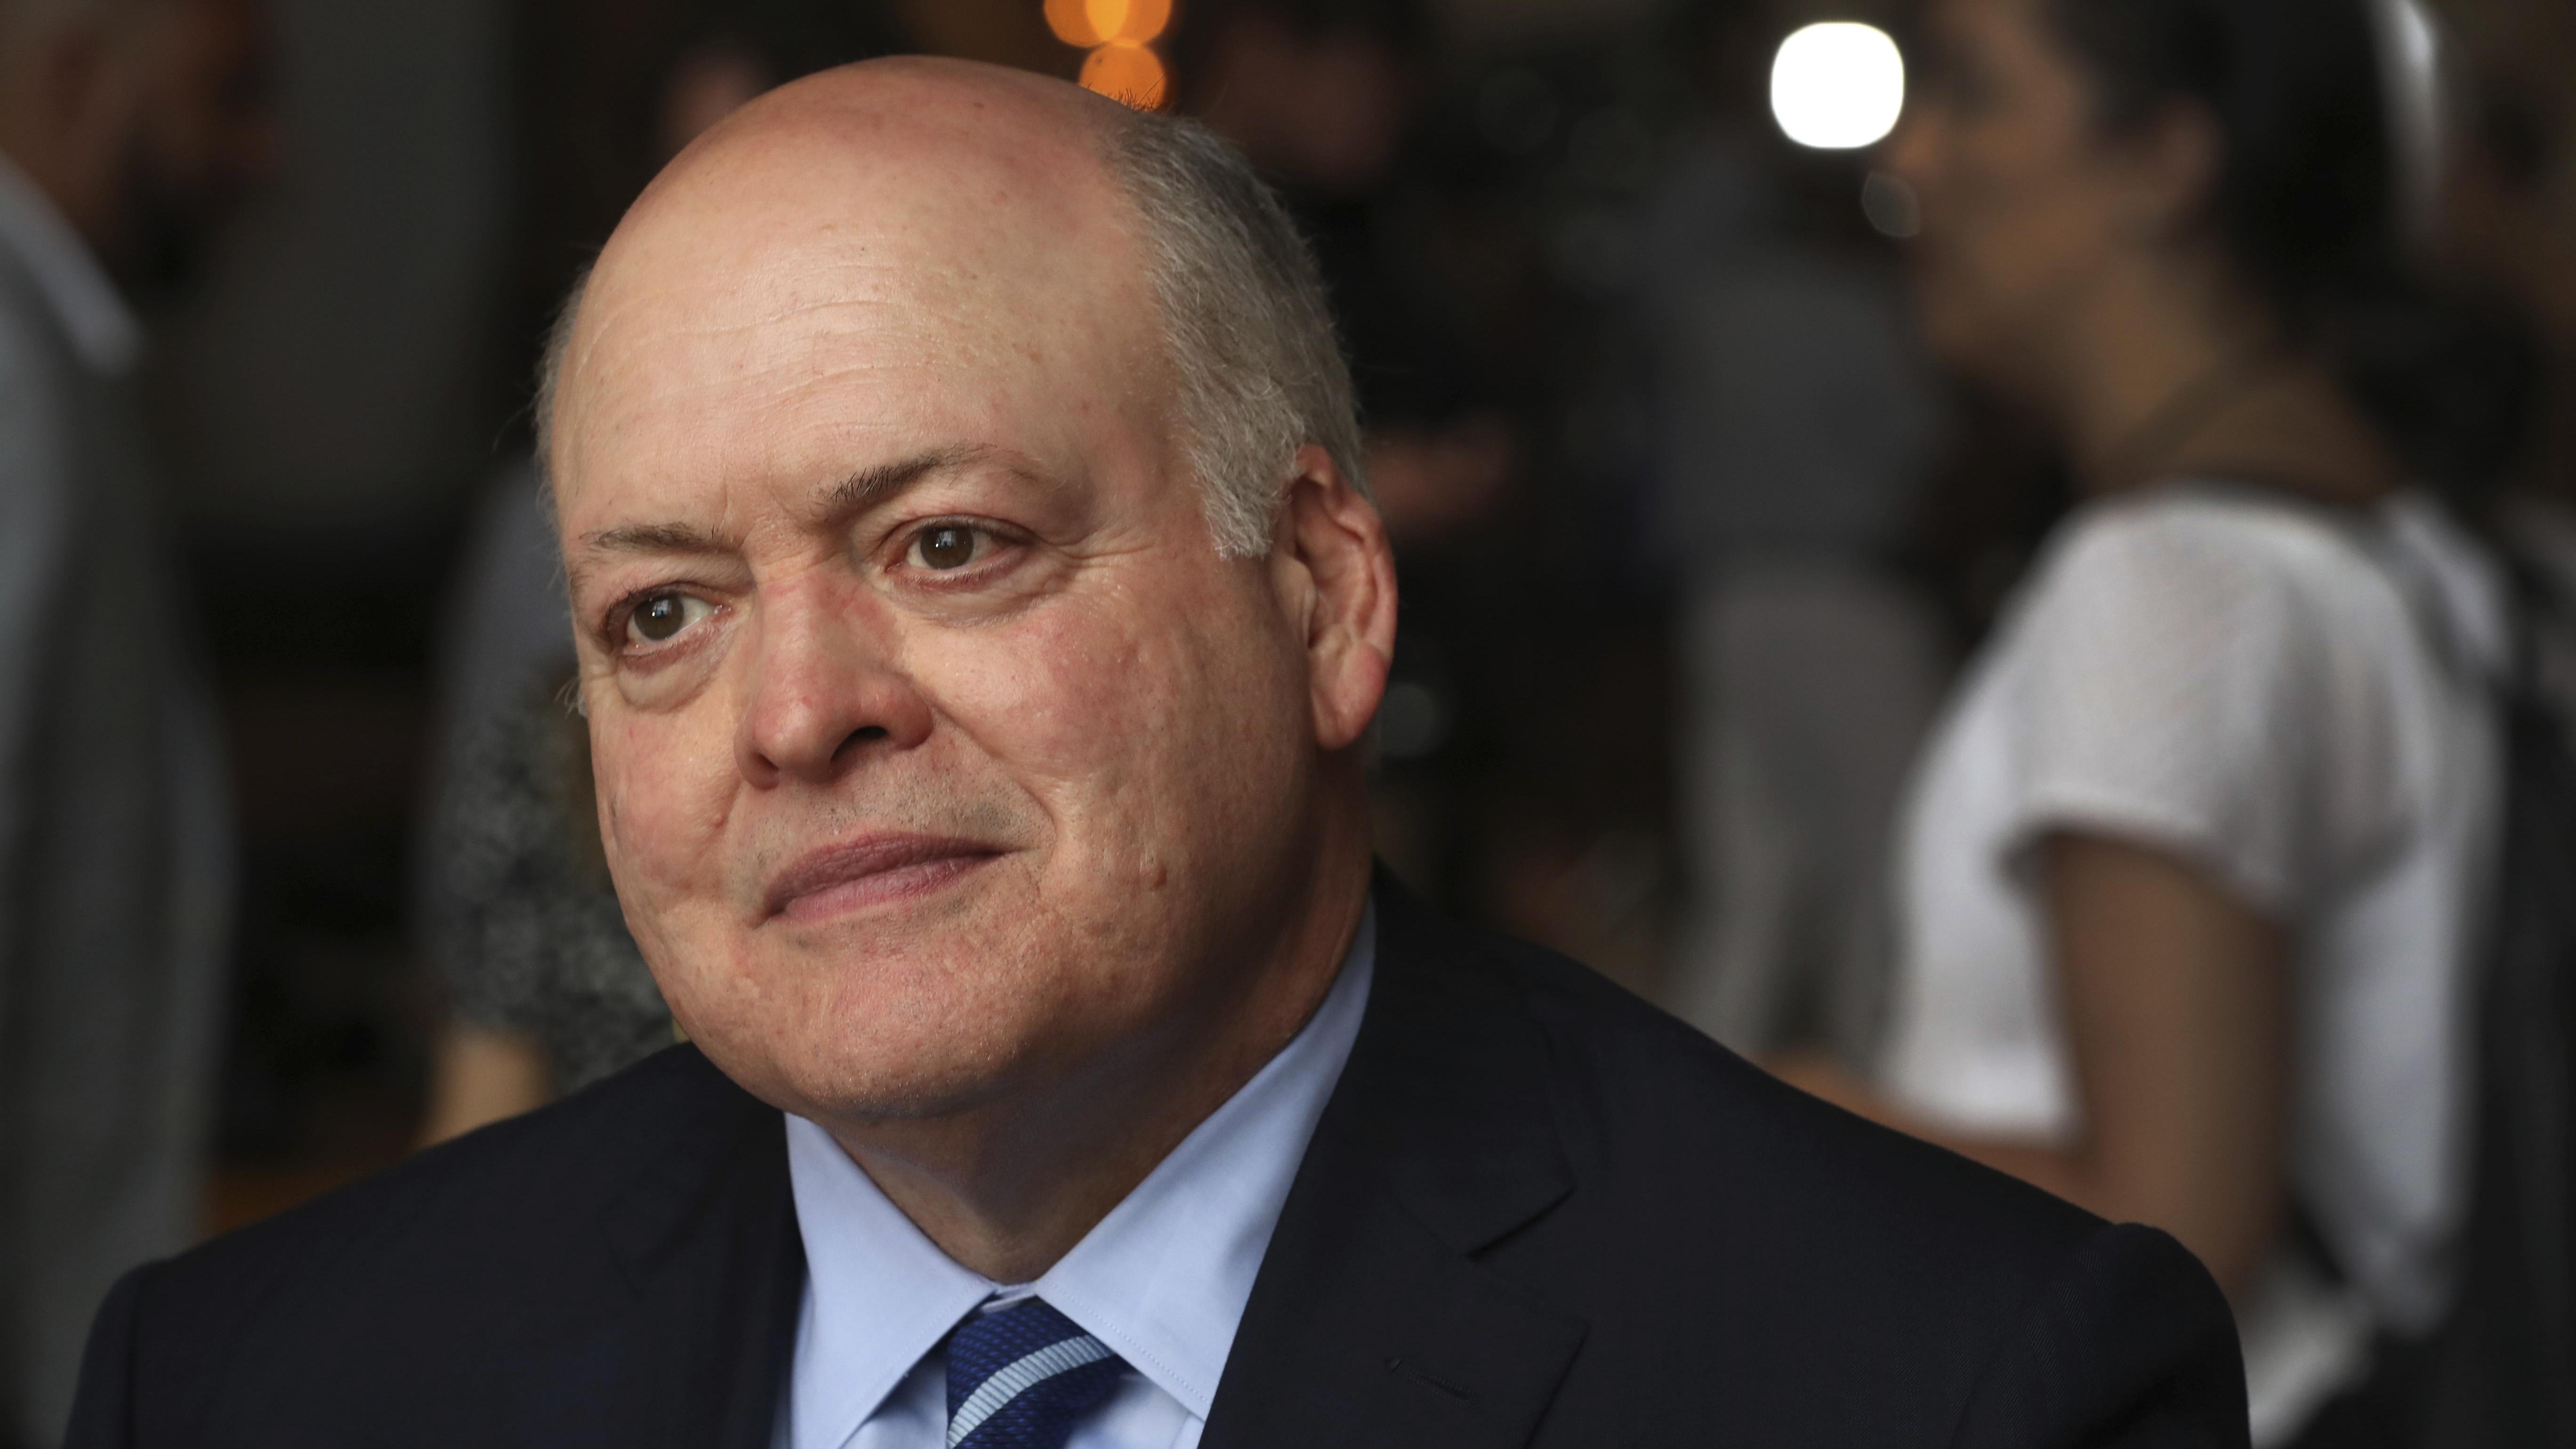 Ford Motor Co. CEO Jim Hackett is pushing a company-wide restructuring seeking input from lower-level managers and employees who actually do the work. His goal: to improve the "design" of the business, to reduce costs and to boost profit margins.